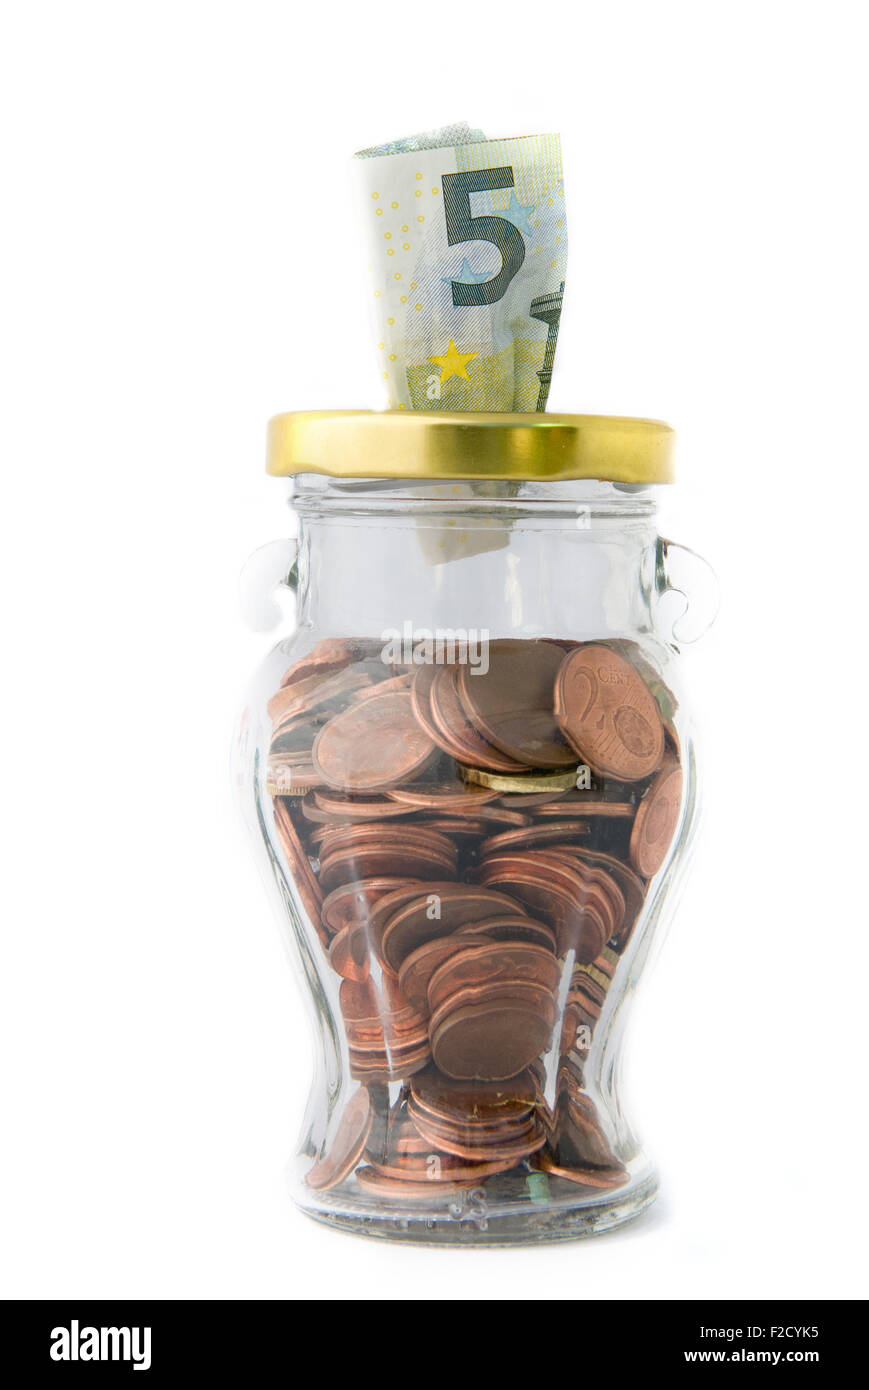 Euro money,  including coins and notes,  on a jar. Concept of home savings Stock Photo